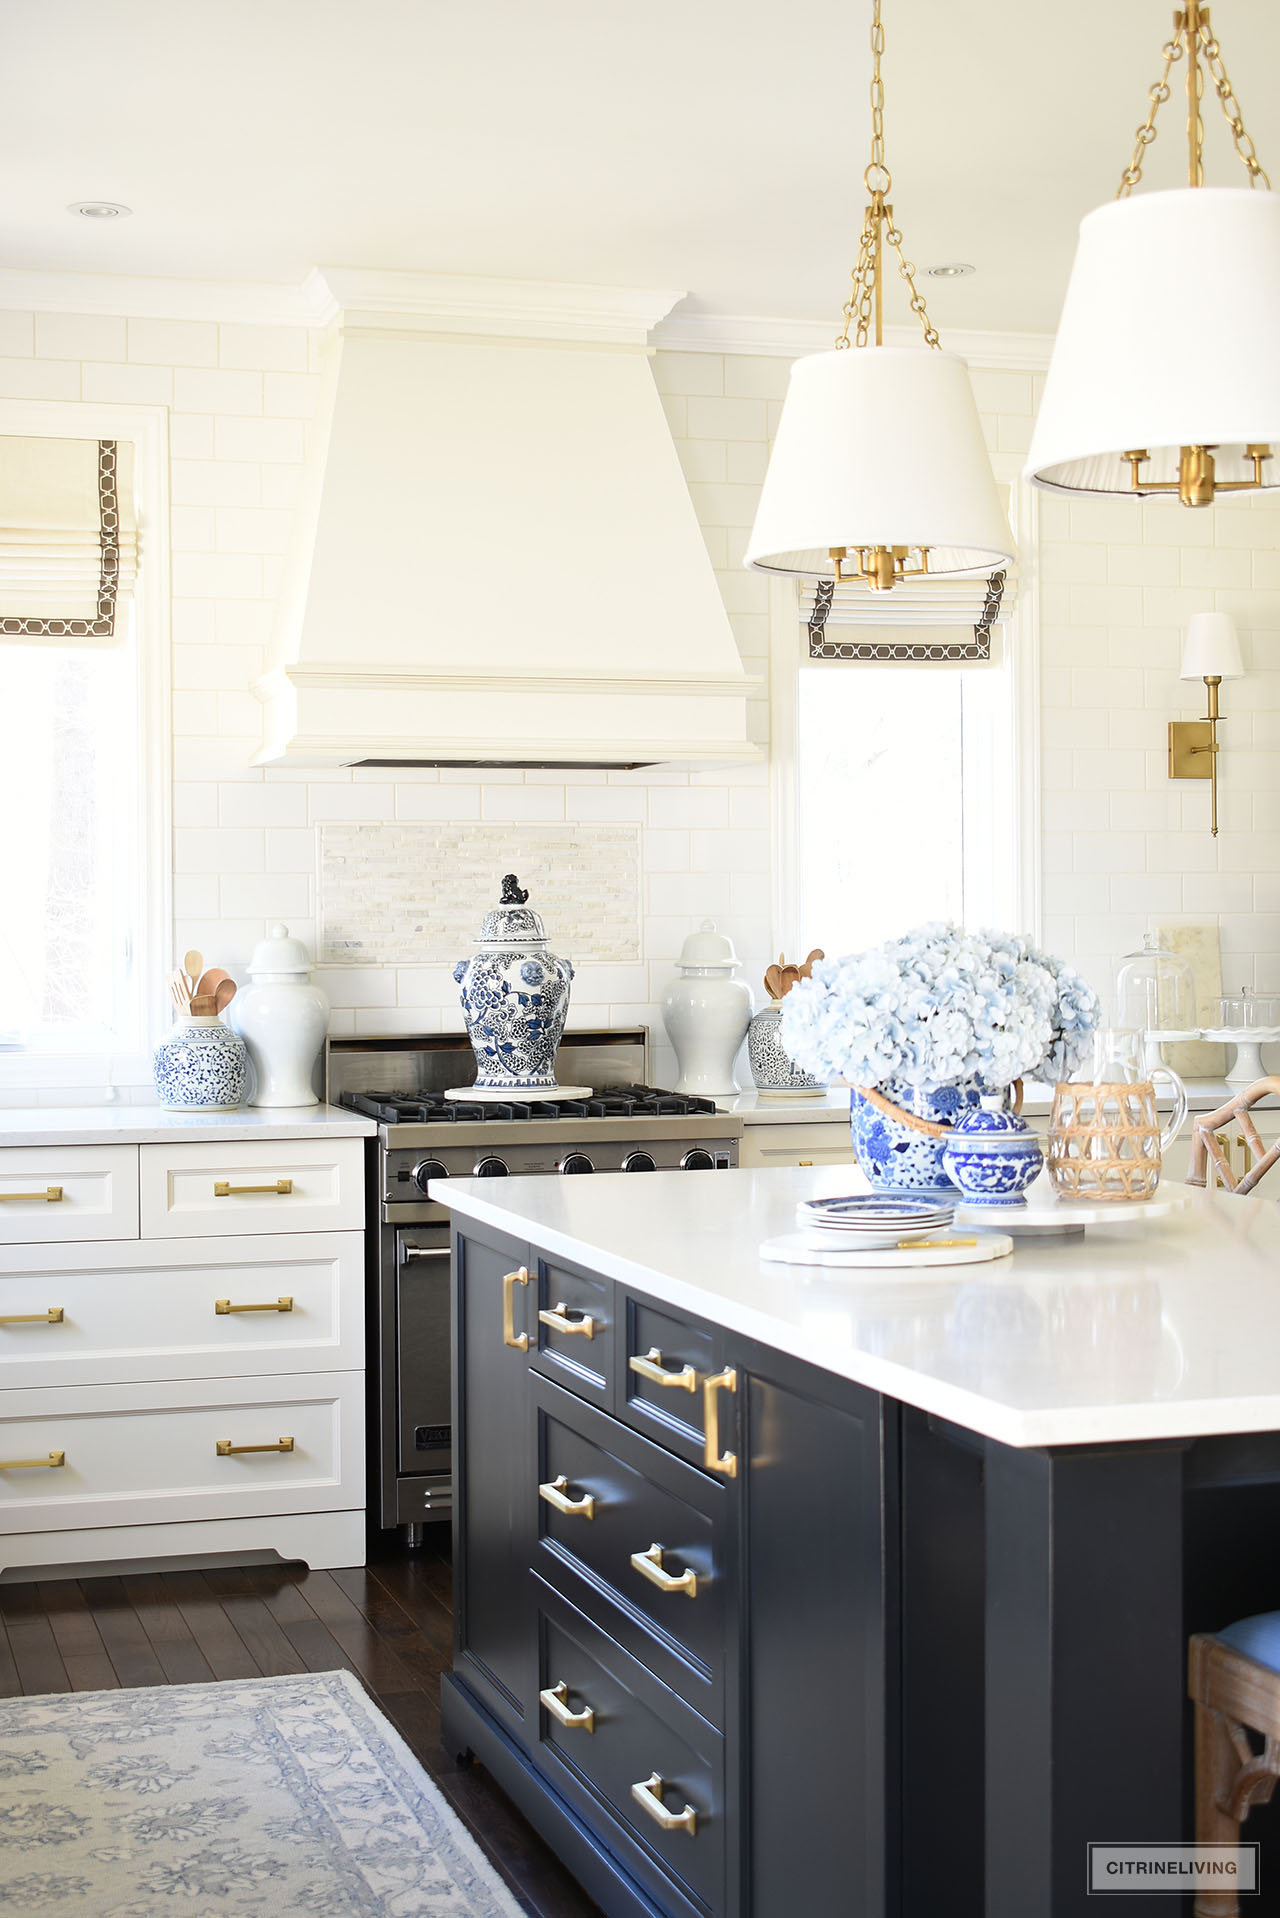 Kitchen island and stove styled for spring with beautiful blue and white chinoiserie pieces.